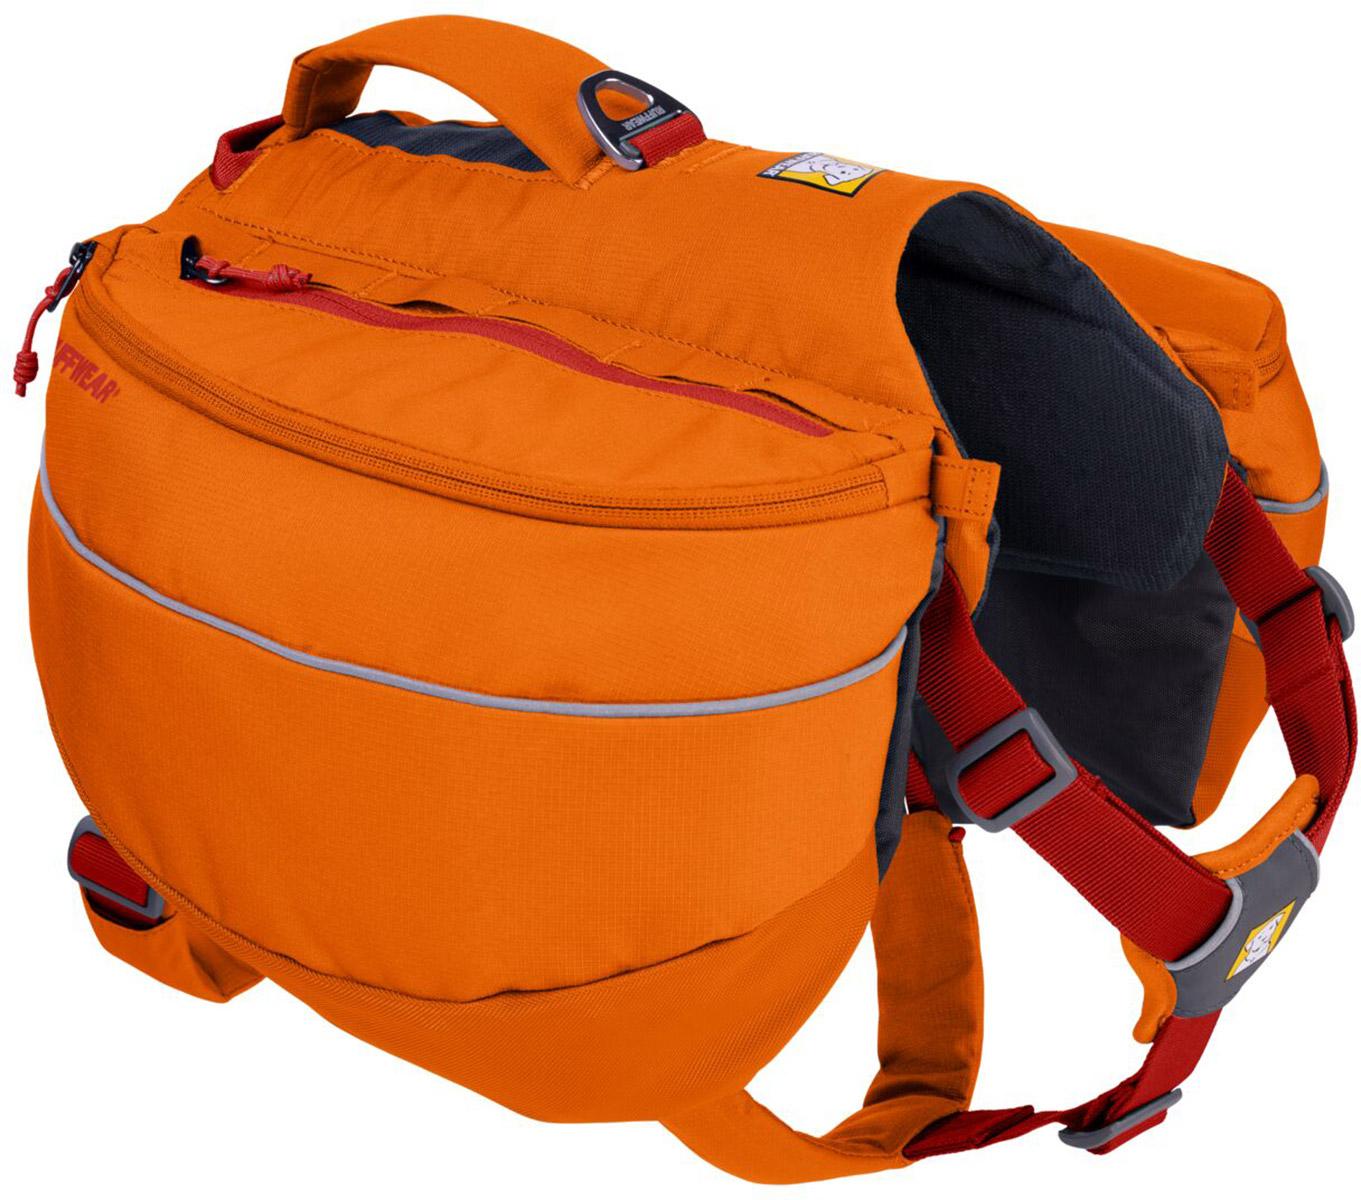 Ruffwear Approach Pack Dog Harness And Backpack - Campfire Orange